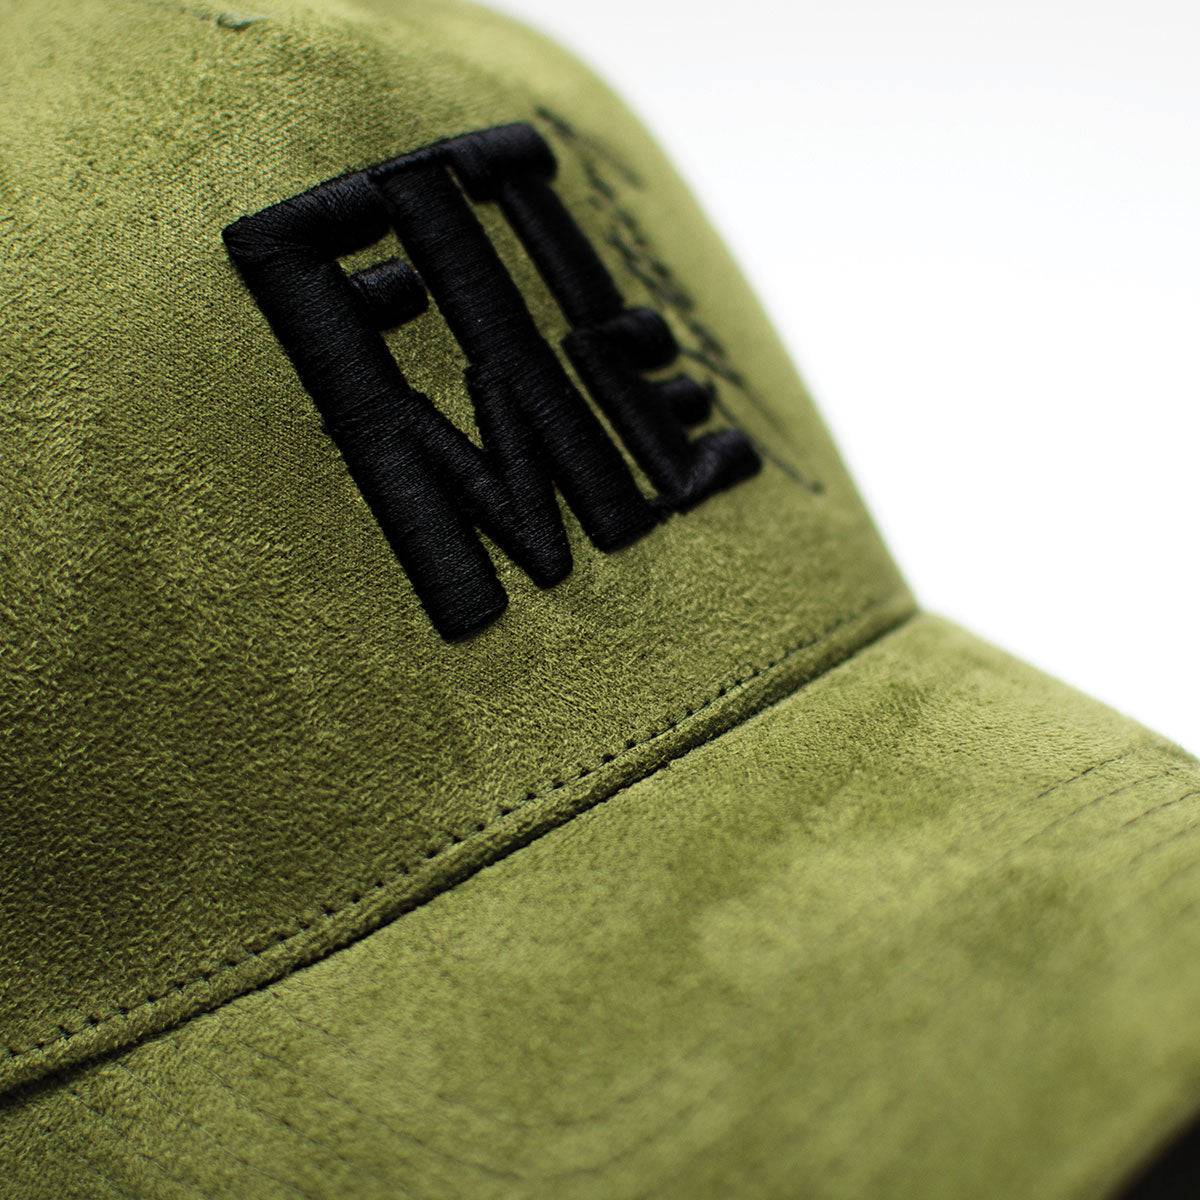 Green Suede Trucker Cap | FitMe Clothing - FitMe Clothing